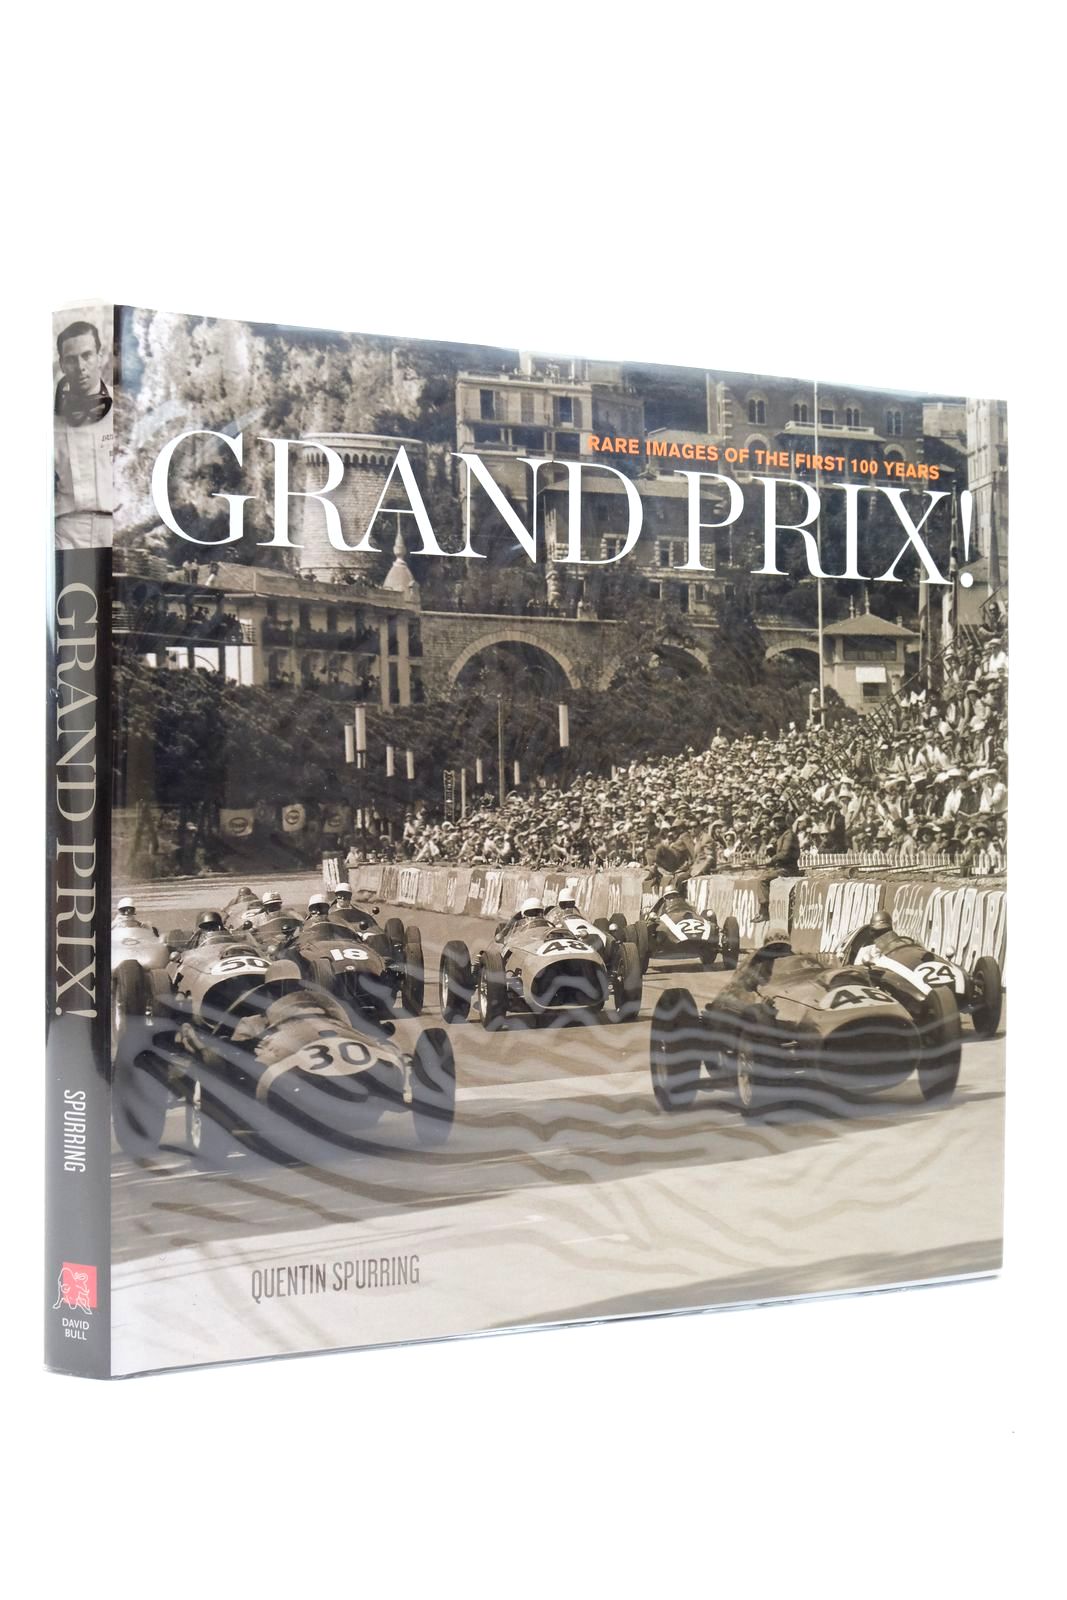 Photo of GRAND PRIX! RARE IMAGES OF THE FIRST 100 YEARS written by Spurring, Quentin published by David Bull Publishing (STOCK CODE: 2138741)  for sale by Stella & Rose's Books